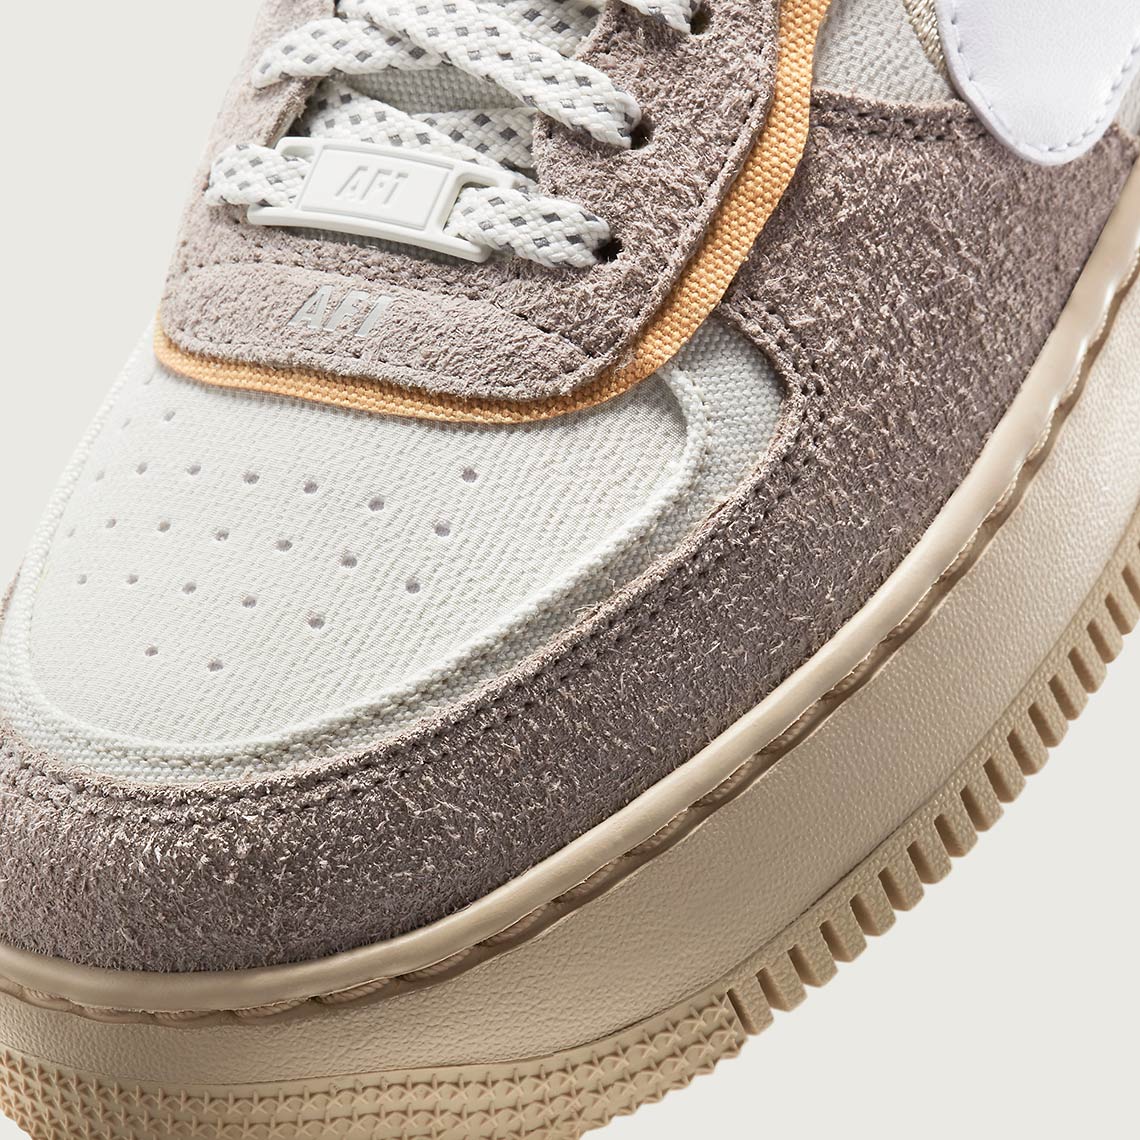 Nike Air Force 1 Dc5270 016 Release Info 6